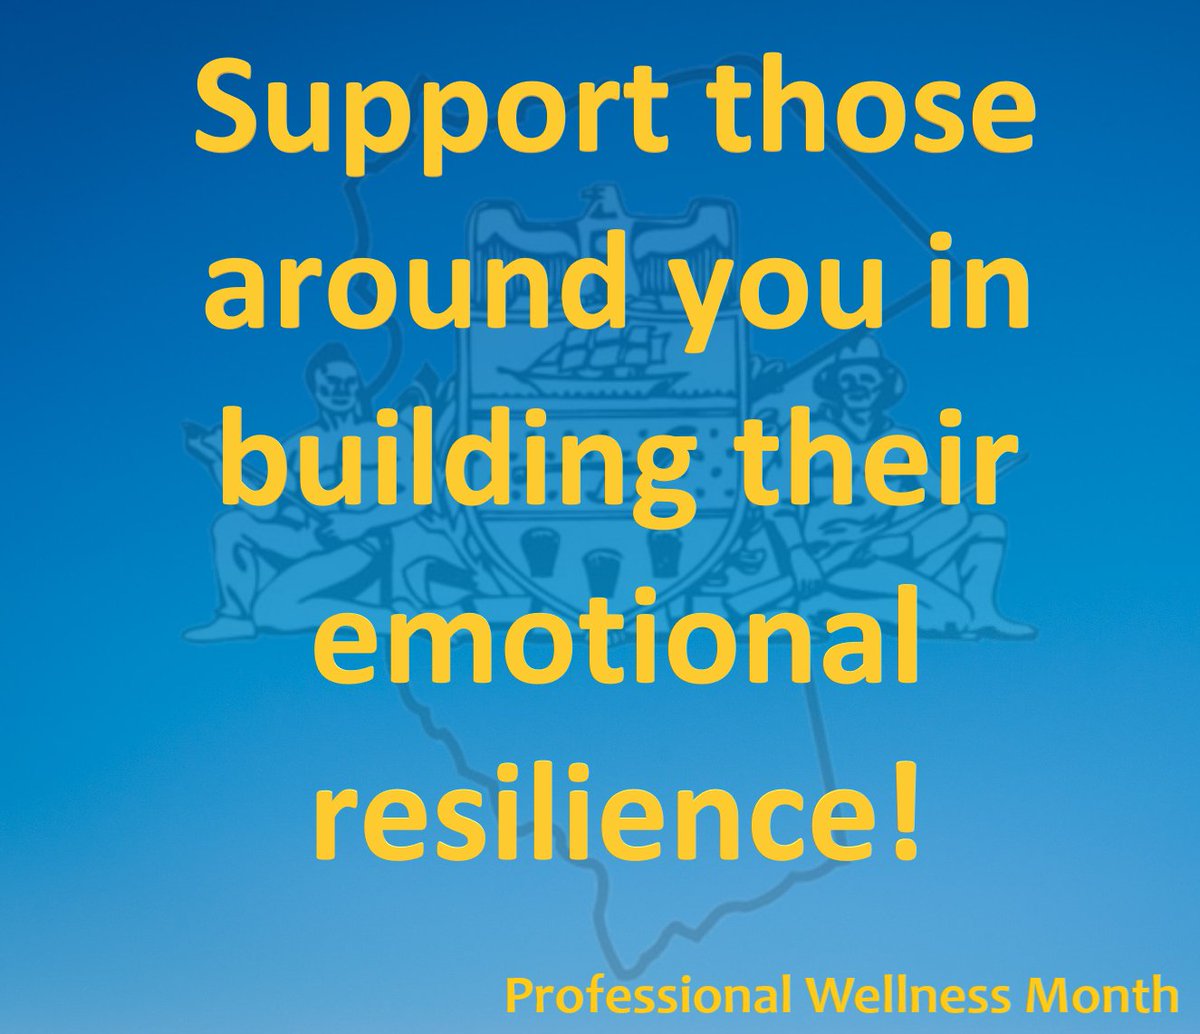 Mindfulness is one technique that can help individuals stay present in the moment, think rationally, and remain calm. Support your employees and coworkers this month by helping everyone stay mindful and build their emotional resilience! #ProfessionalWellnessMonth #StayWell